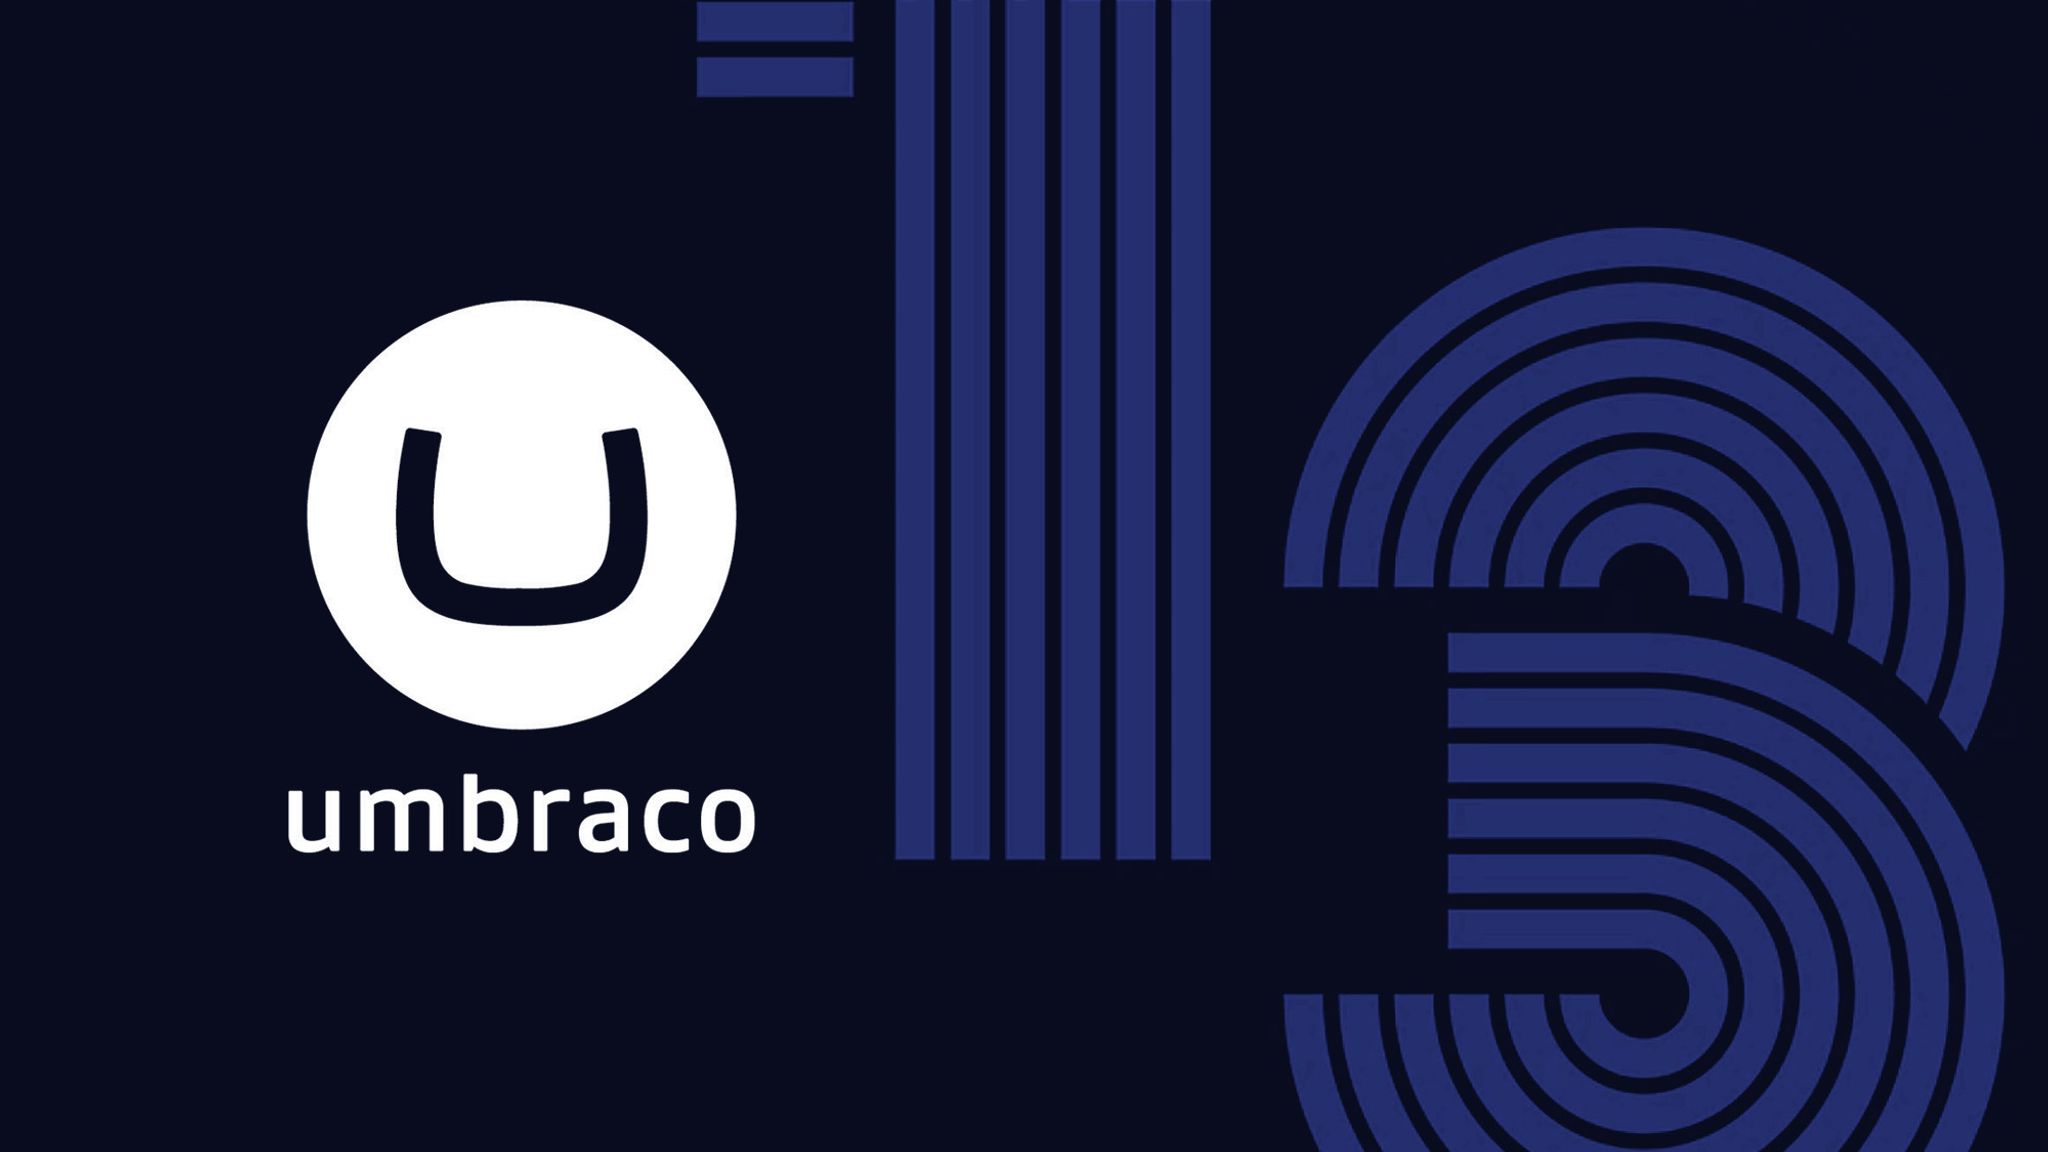 Umbraco logo with stylized number 13 in background